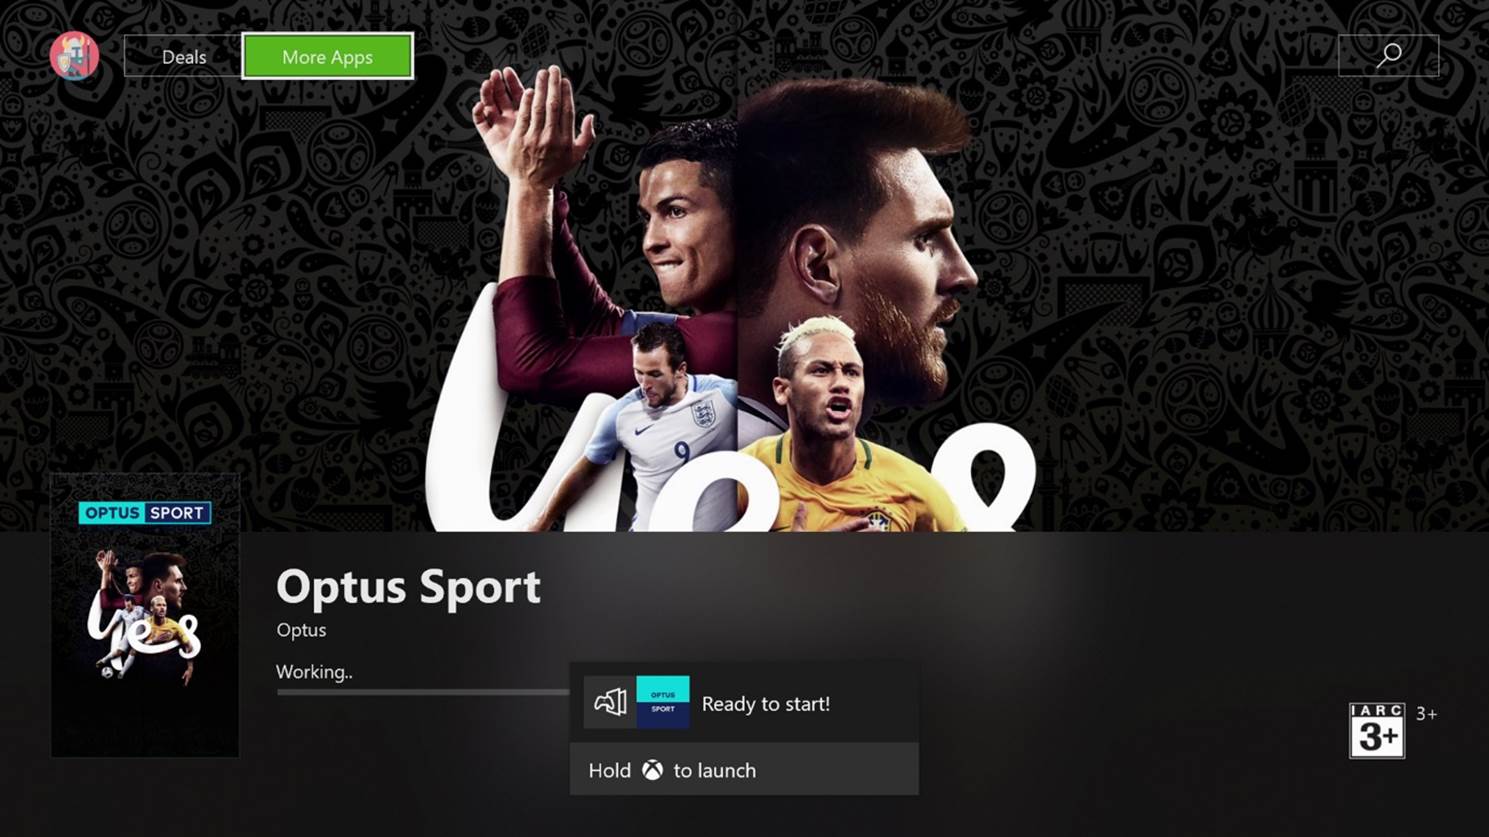 You Can Watch The 2018 FIFA World Cup On Xbox One In Australia Via Optus Sport